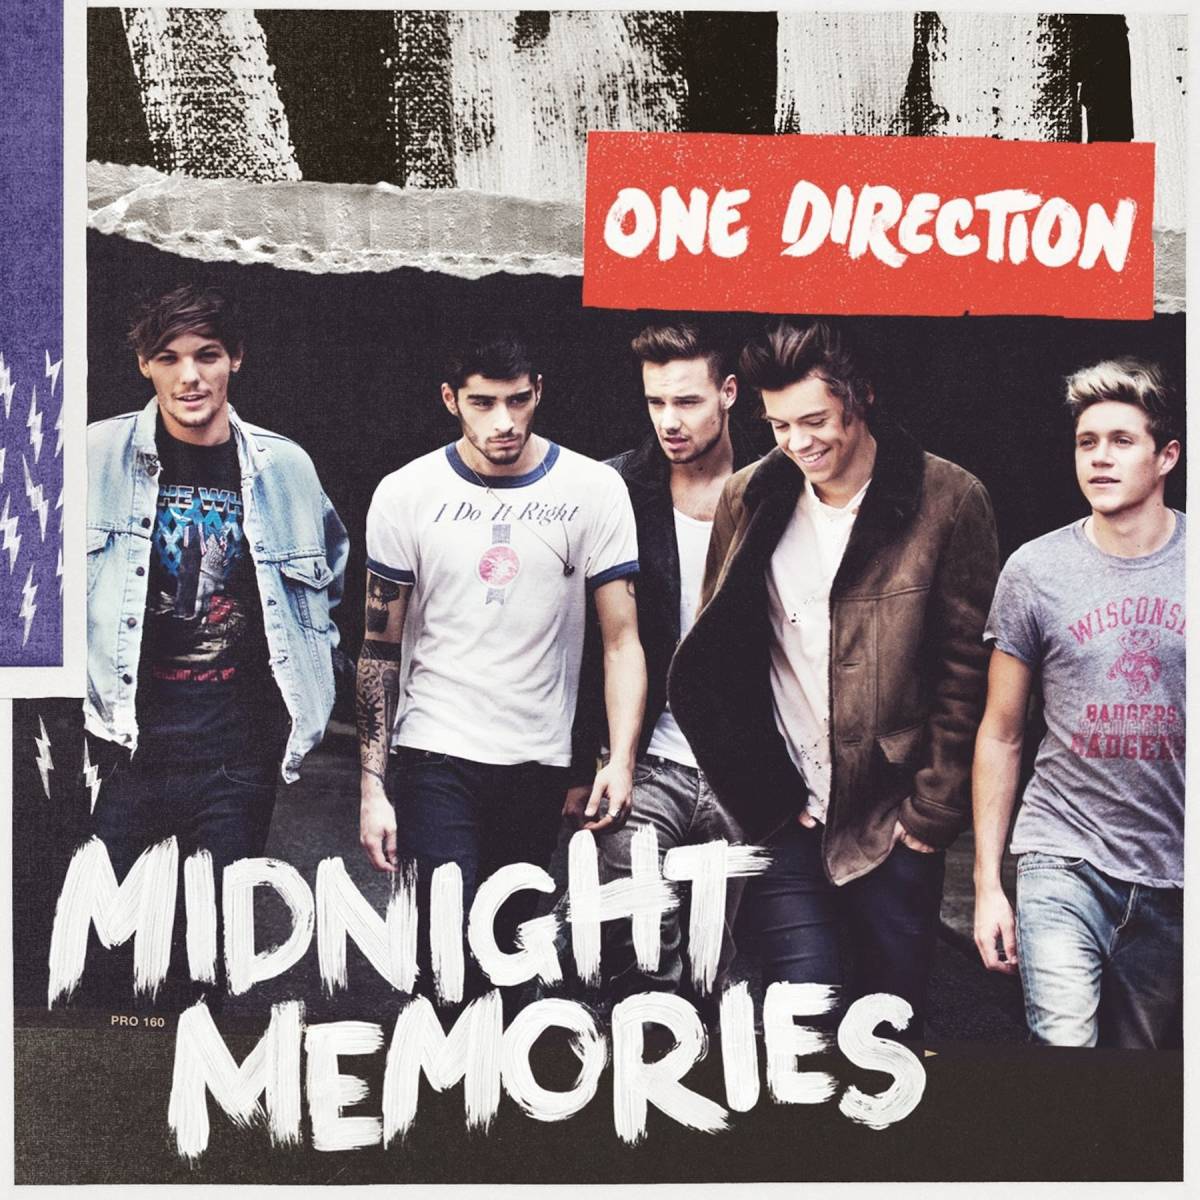 Midnight Memories is the third studio effort by popular Anglo-Irish boy band One Direction.